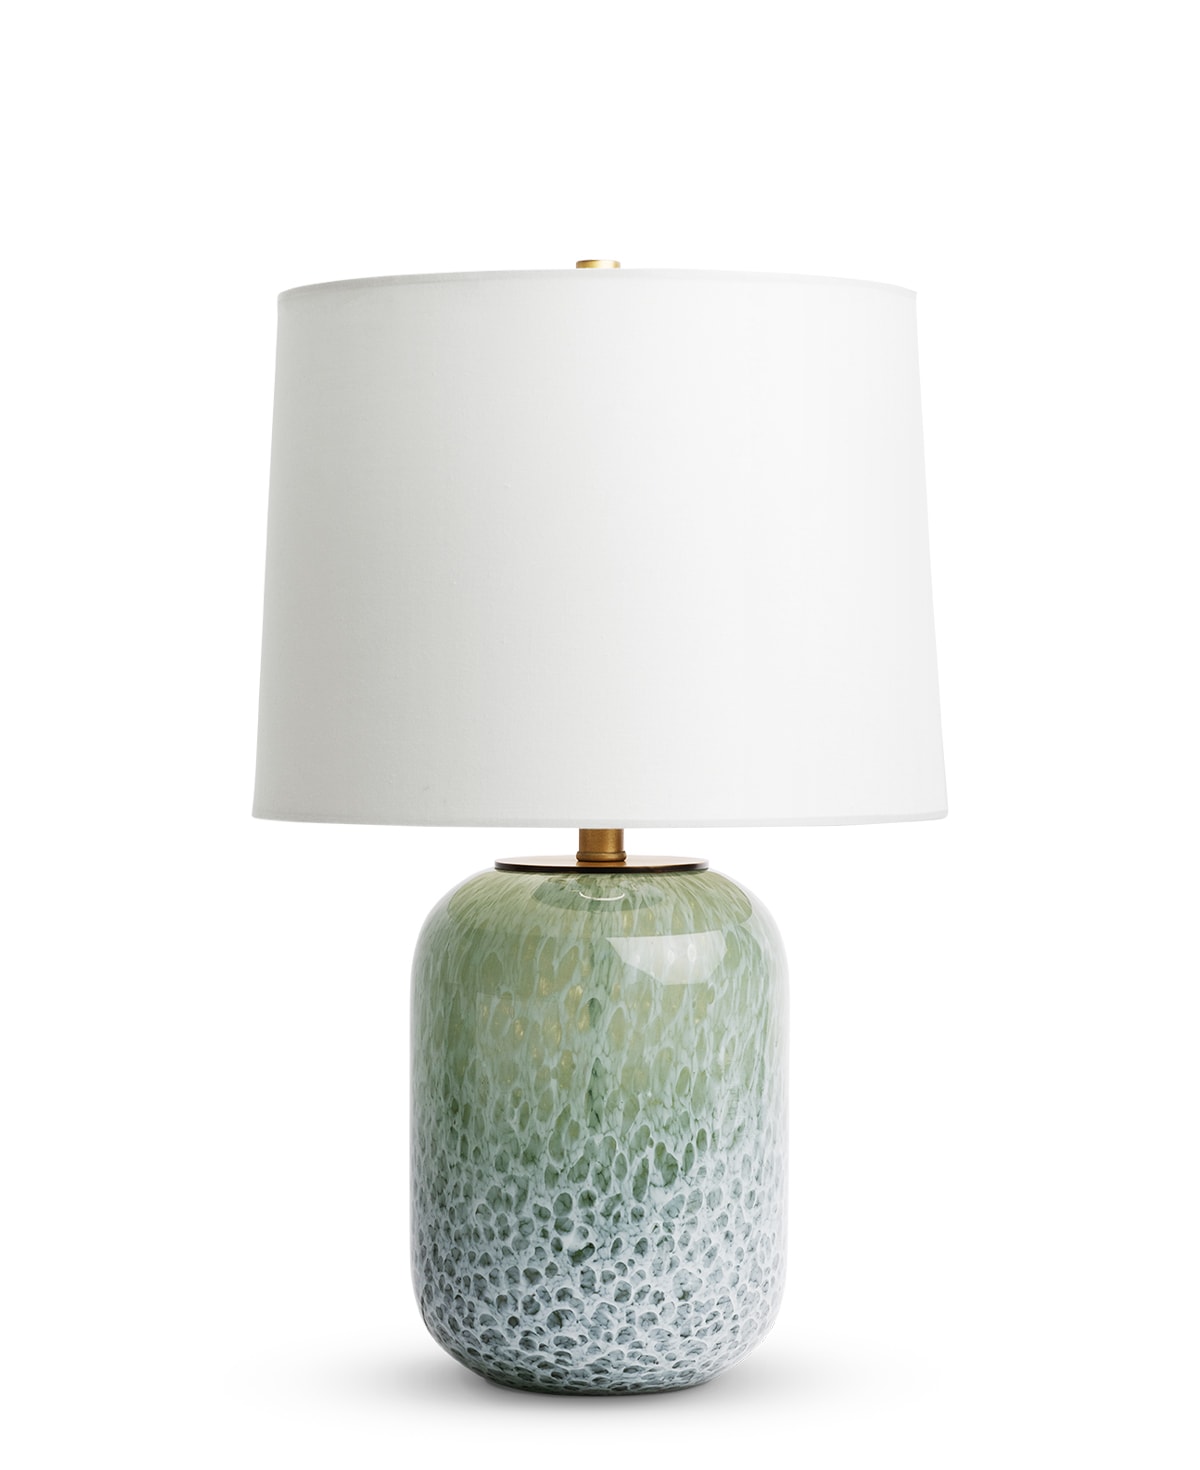 FlowDecor Yates Table Lamp in glass with blue-green finish and off-white linen tapered drum shade (# 4606)